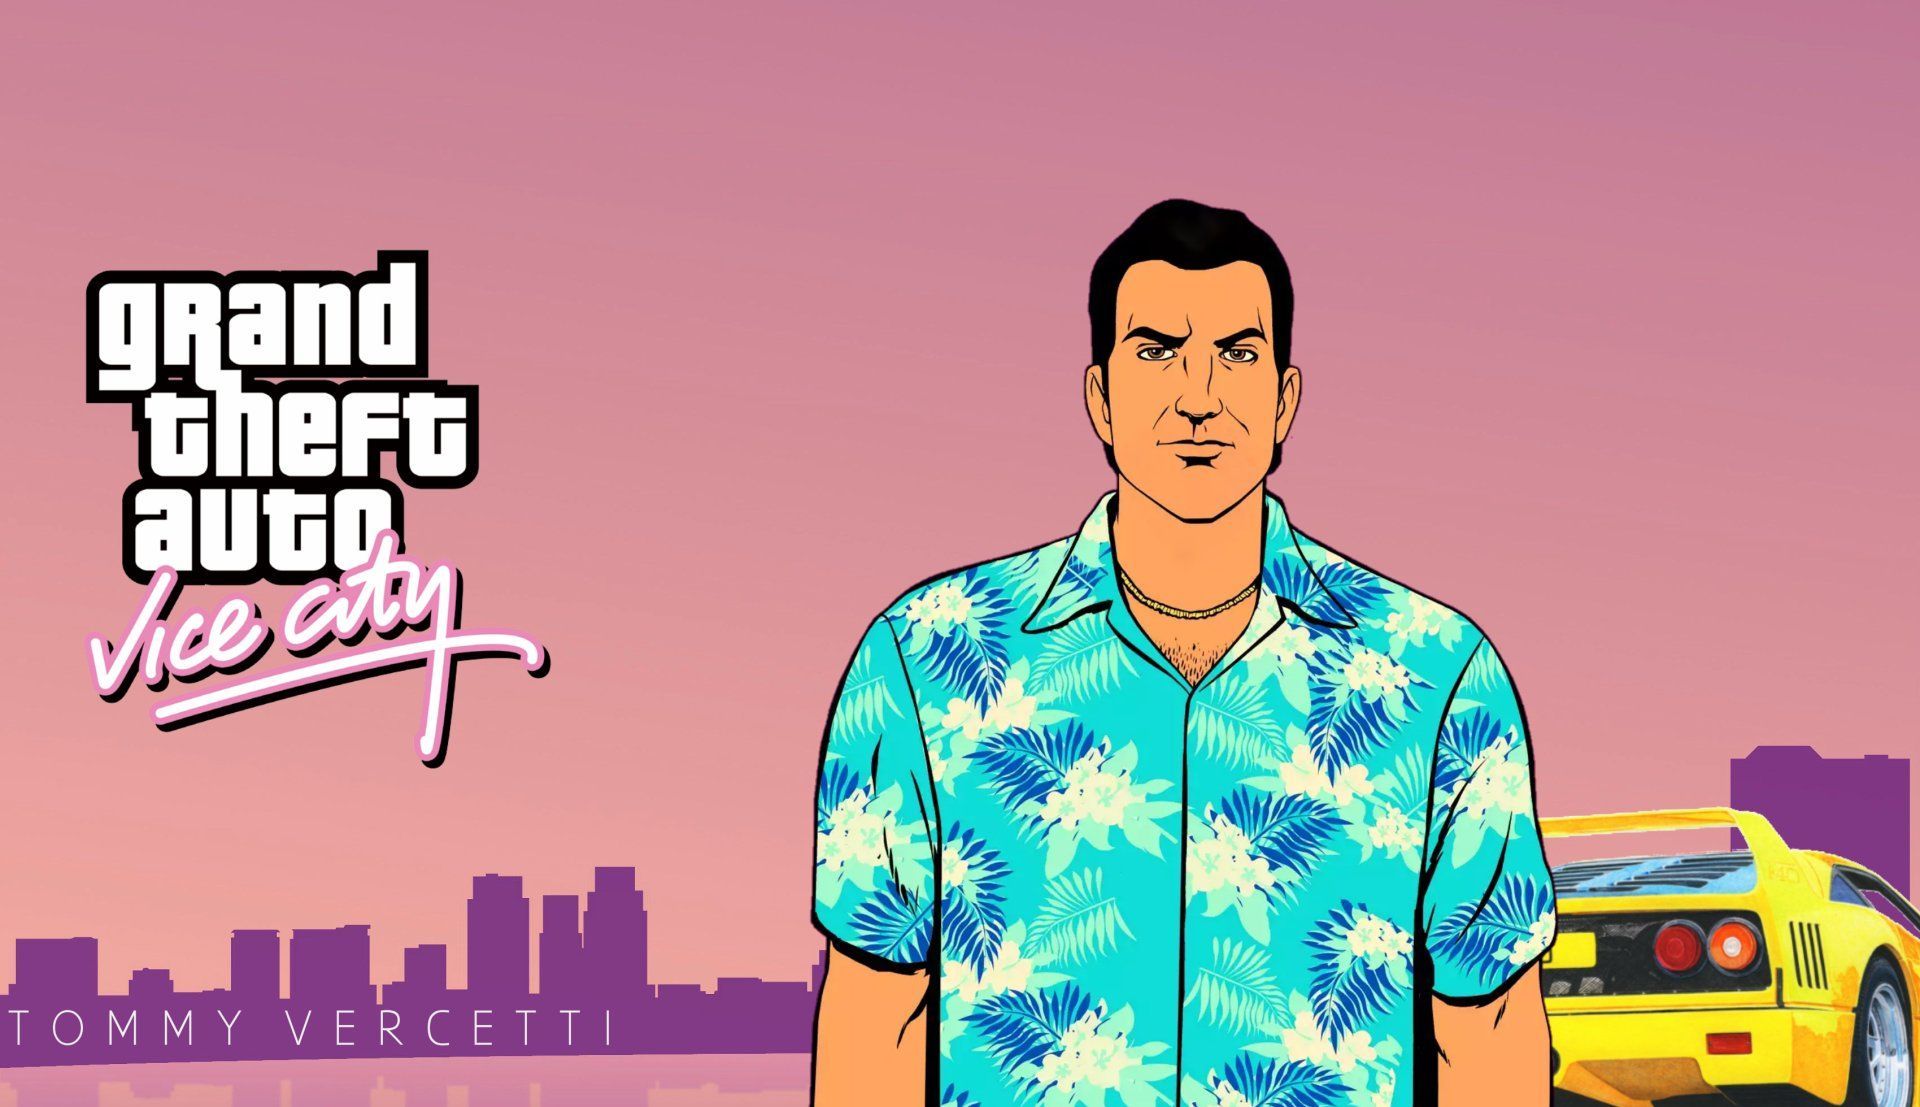 Grand Theft Auto: Vice City Wallpaper Background Image. View, download, comment, and rate. Grand theft auto, City wallpaper, Vice